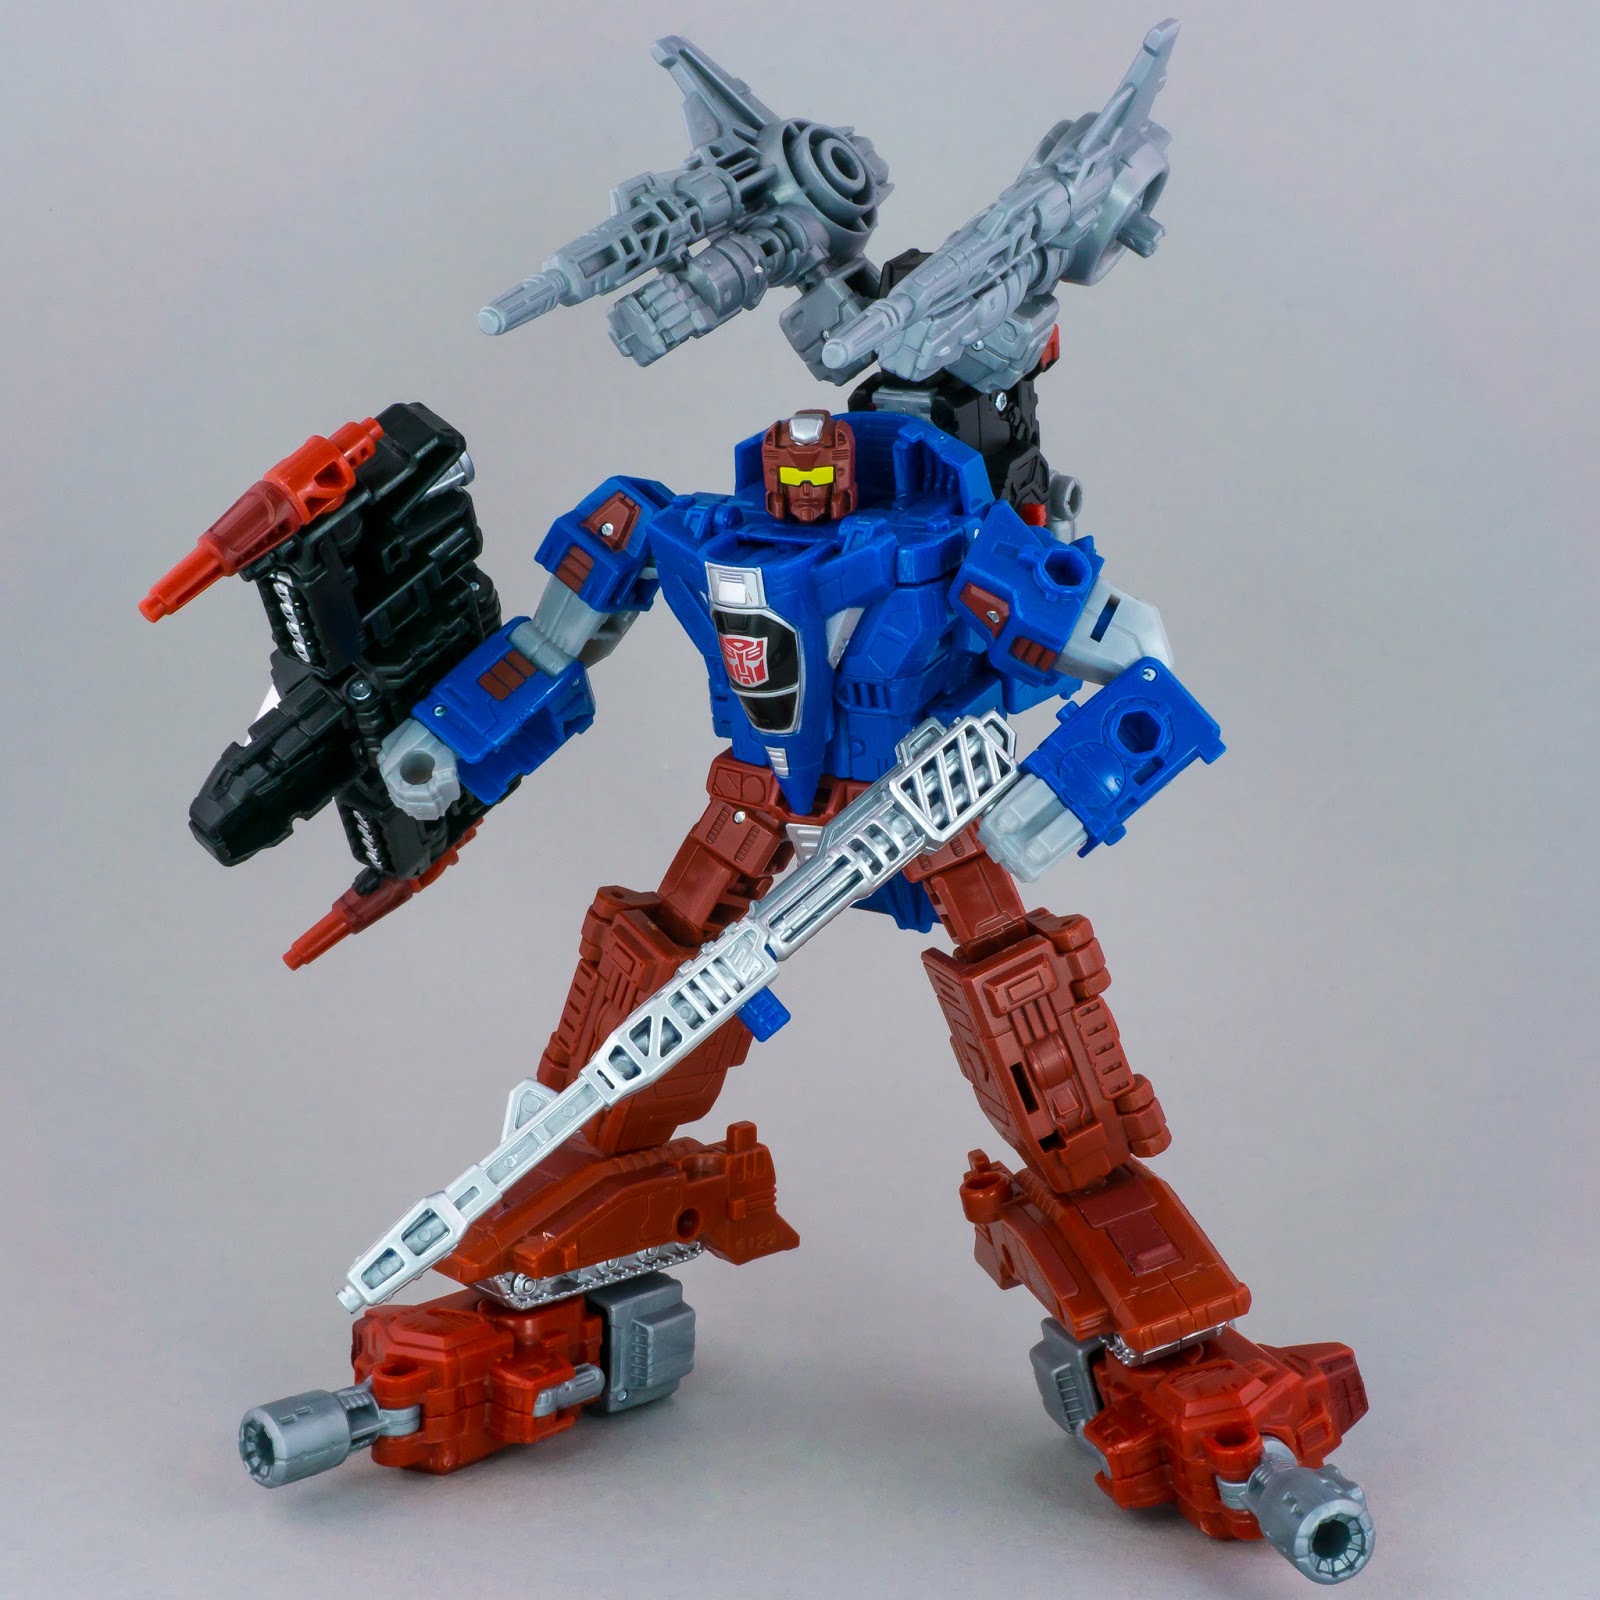 Transformers Generations Selects Cromar offensive loadout weaponizer mode